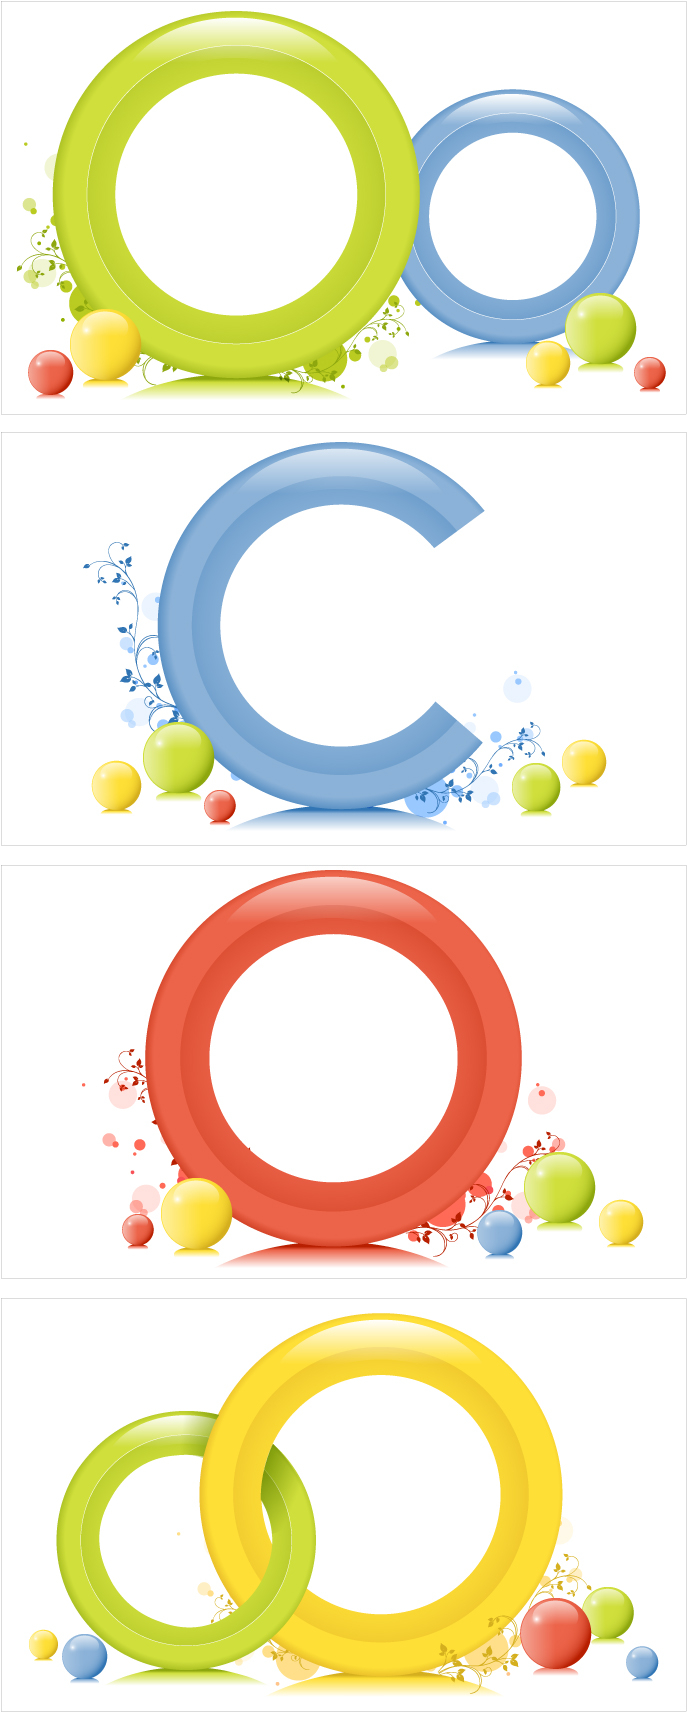 free clipart eps vector - photo #8